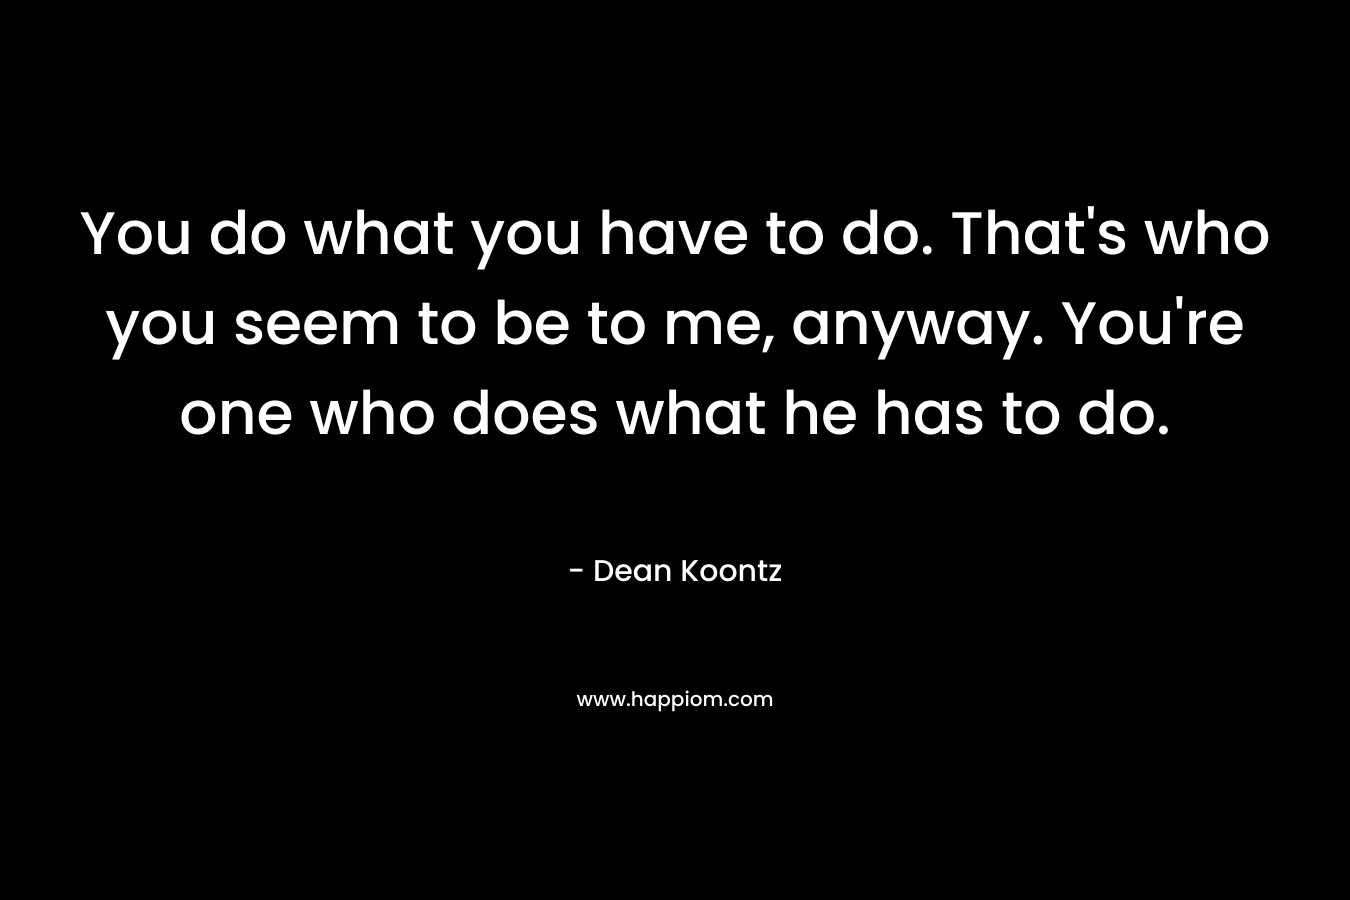 You do what you have to do. That’s who you seem to be to me, anyway. You’re one who does what he has to do. – Dean Koontz